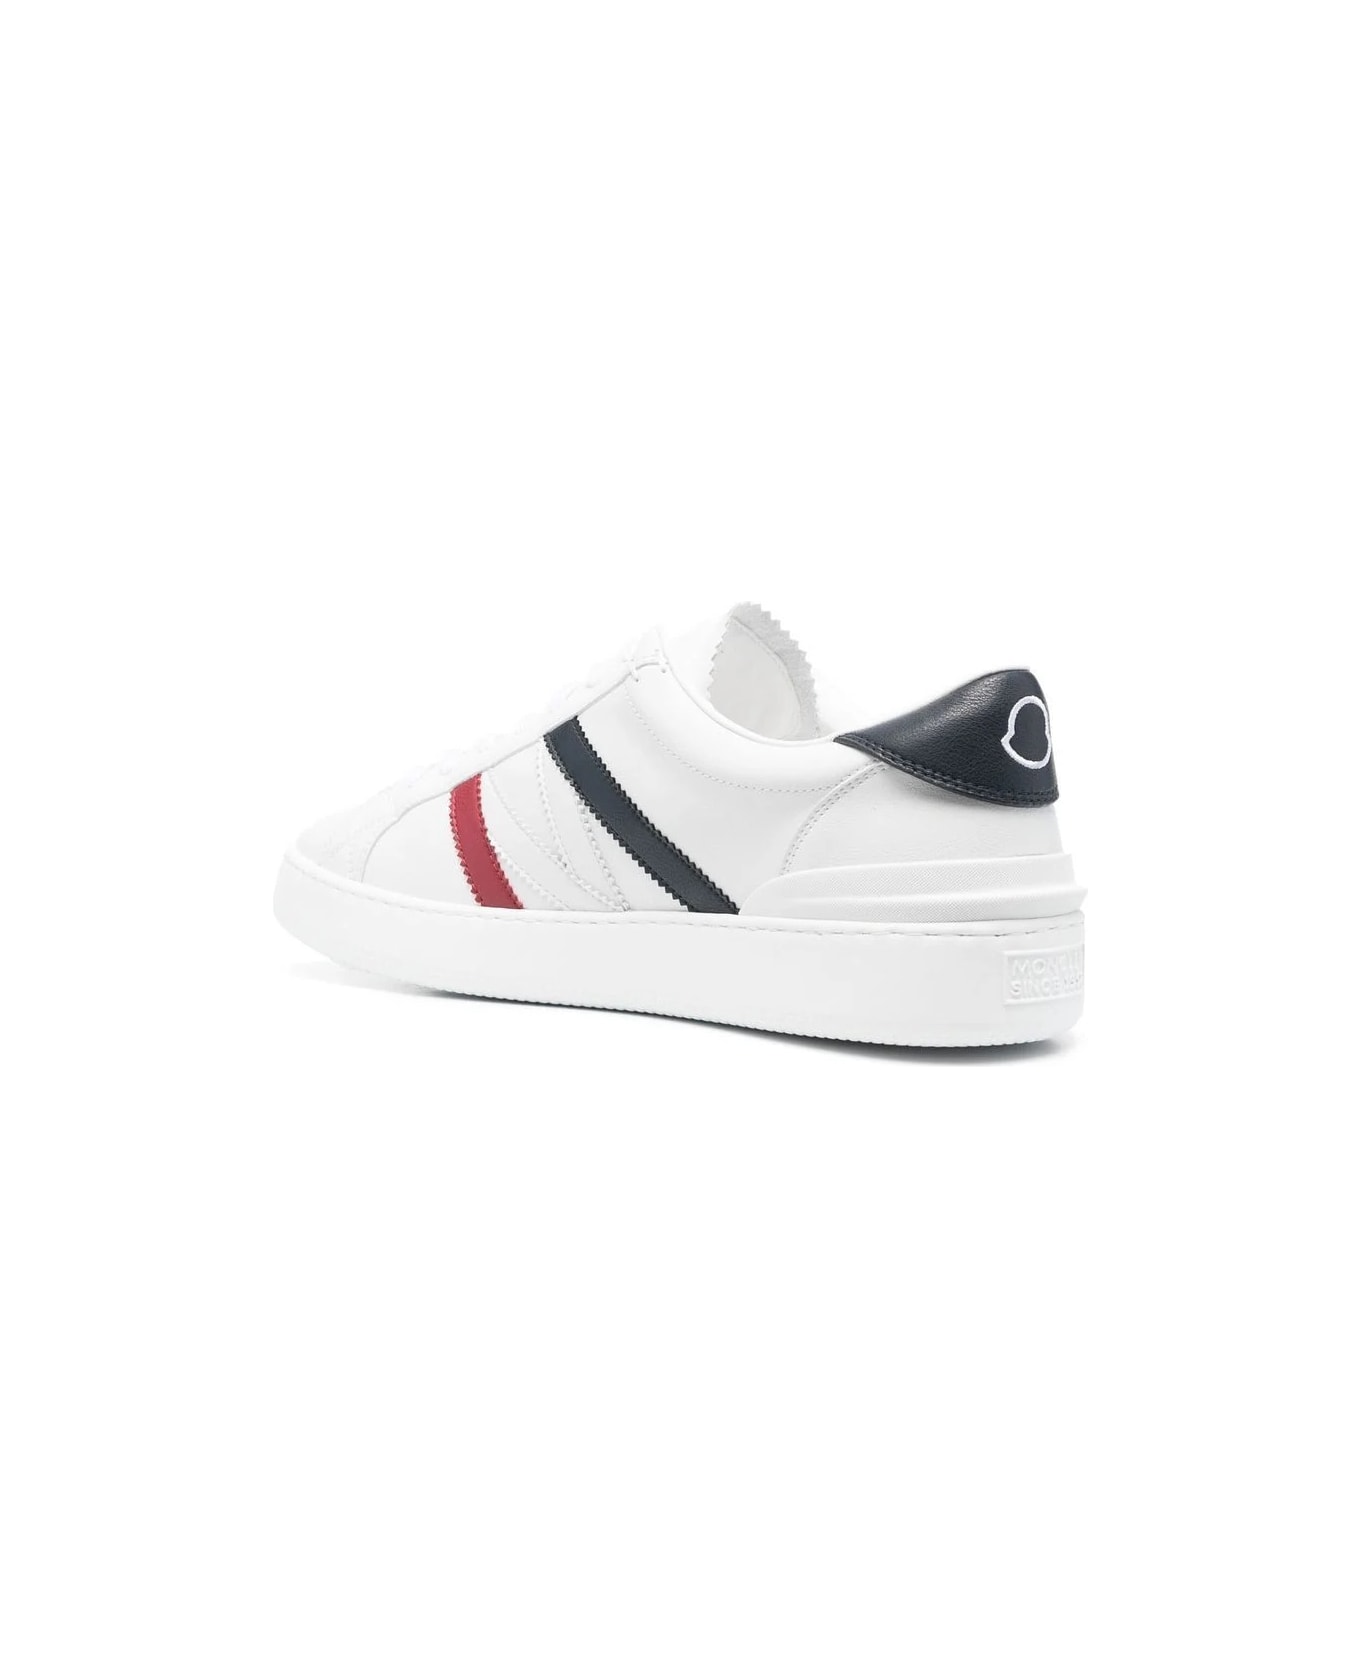 Moncler Monaco M Sneakers In White, Blue And Red - White